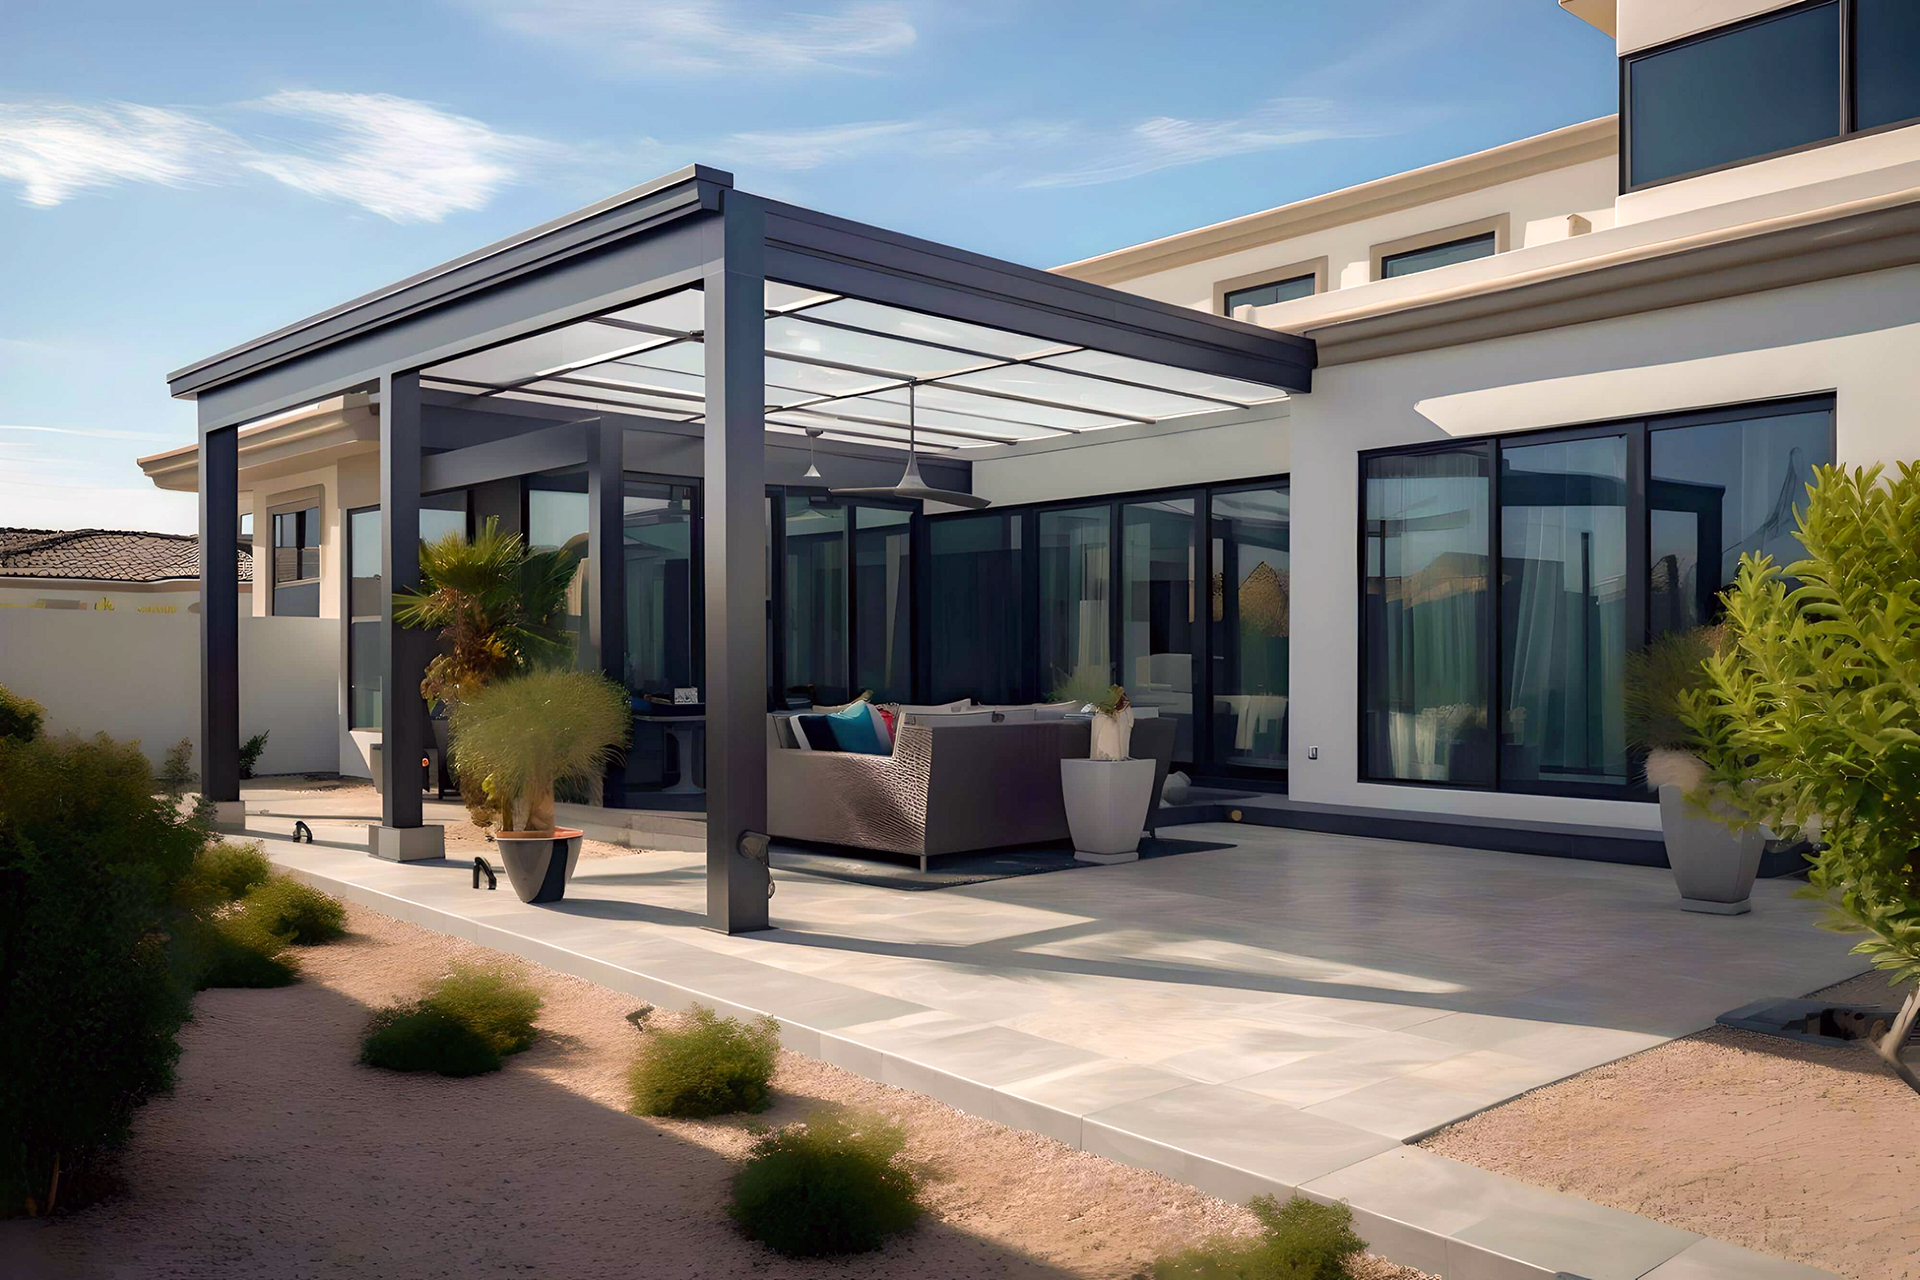 Custom Patio Cover Design Idea Gallery from the professionals at Metro Awnings of Las Vegas, Nevada